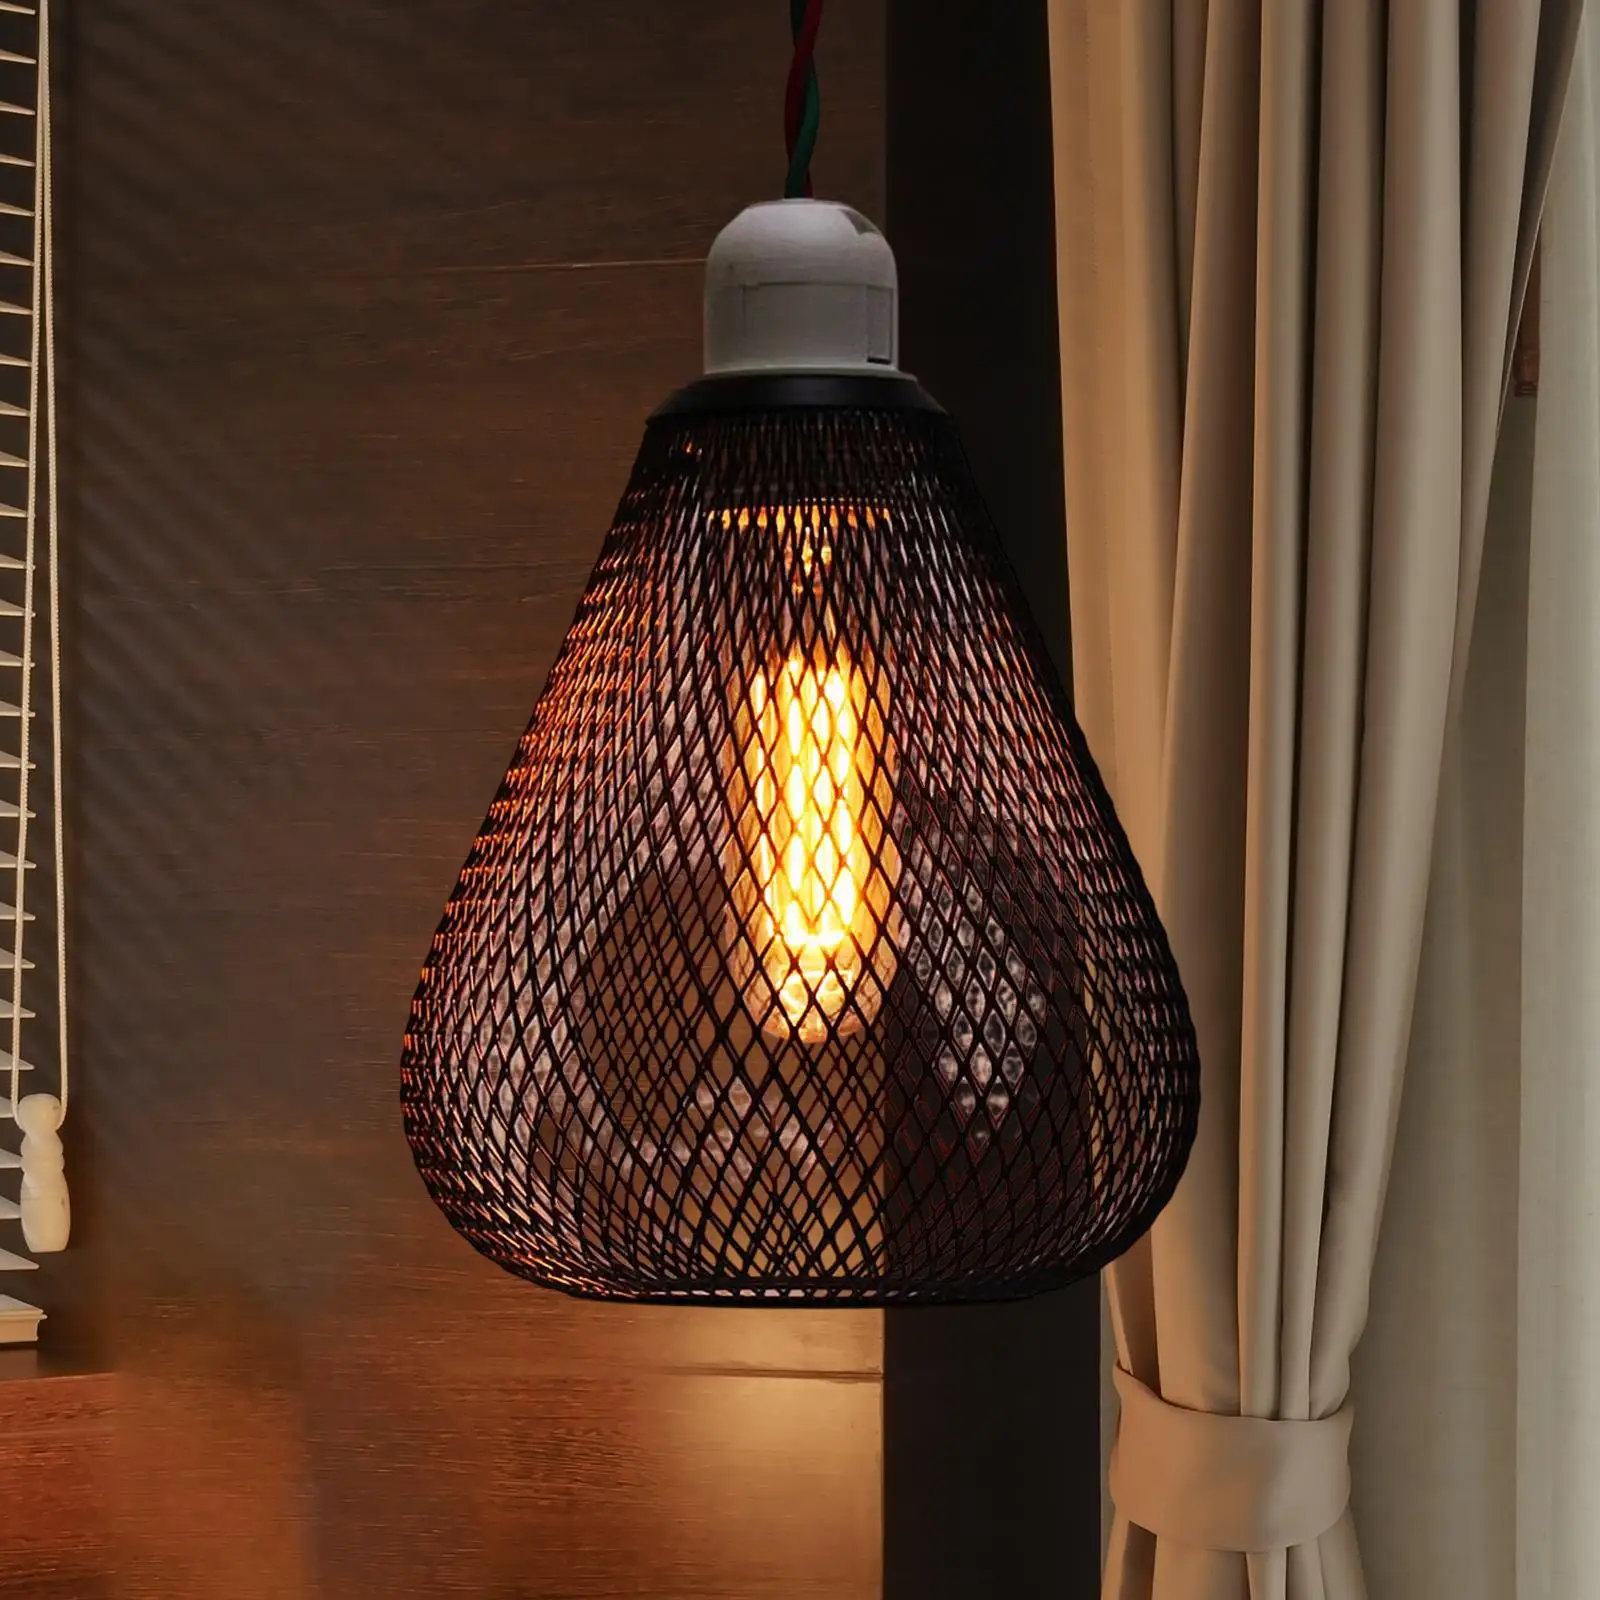 Iron Wire Lampshade Pendant Light Cover Lantern Shade Hanging Light Fixture Chandelier Cover for Cafe